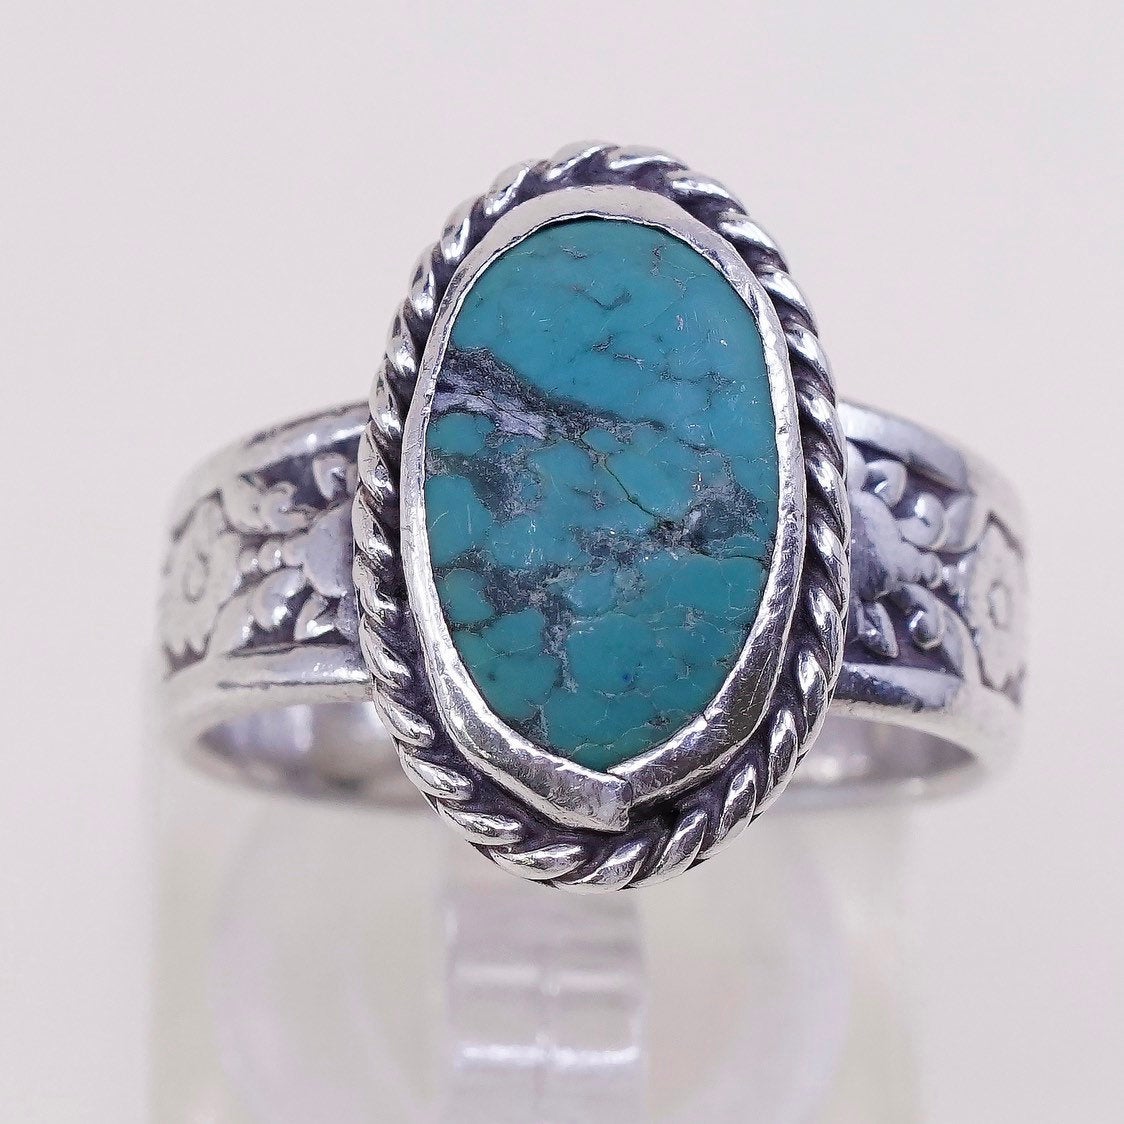 sz 7, Native American sterling silver ring, handmade 925 ring w/ turquoise